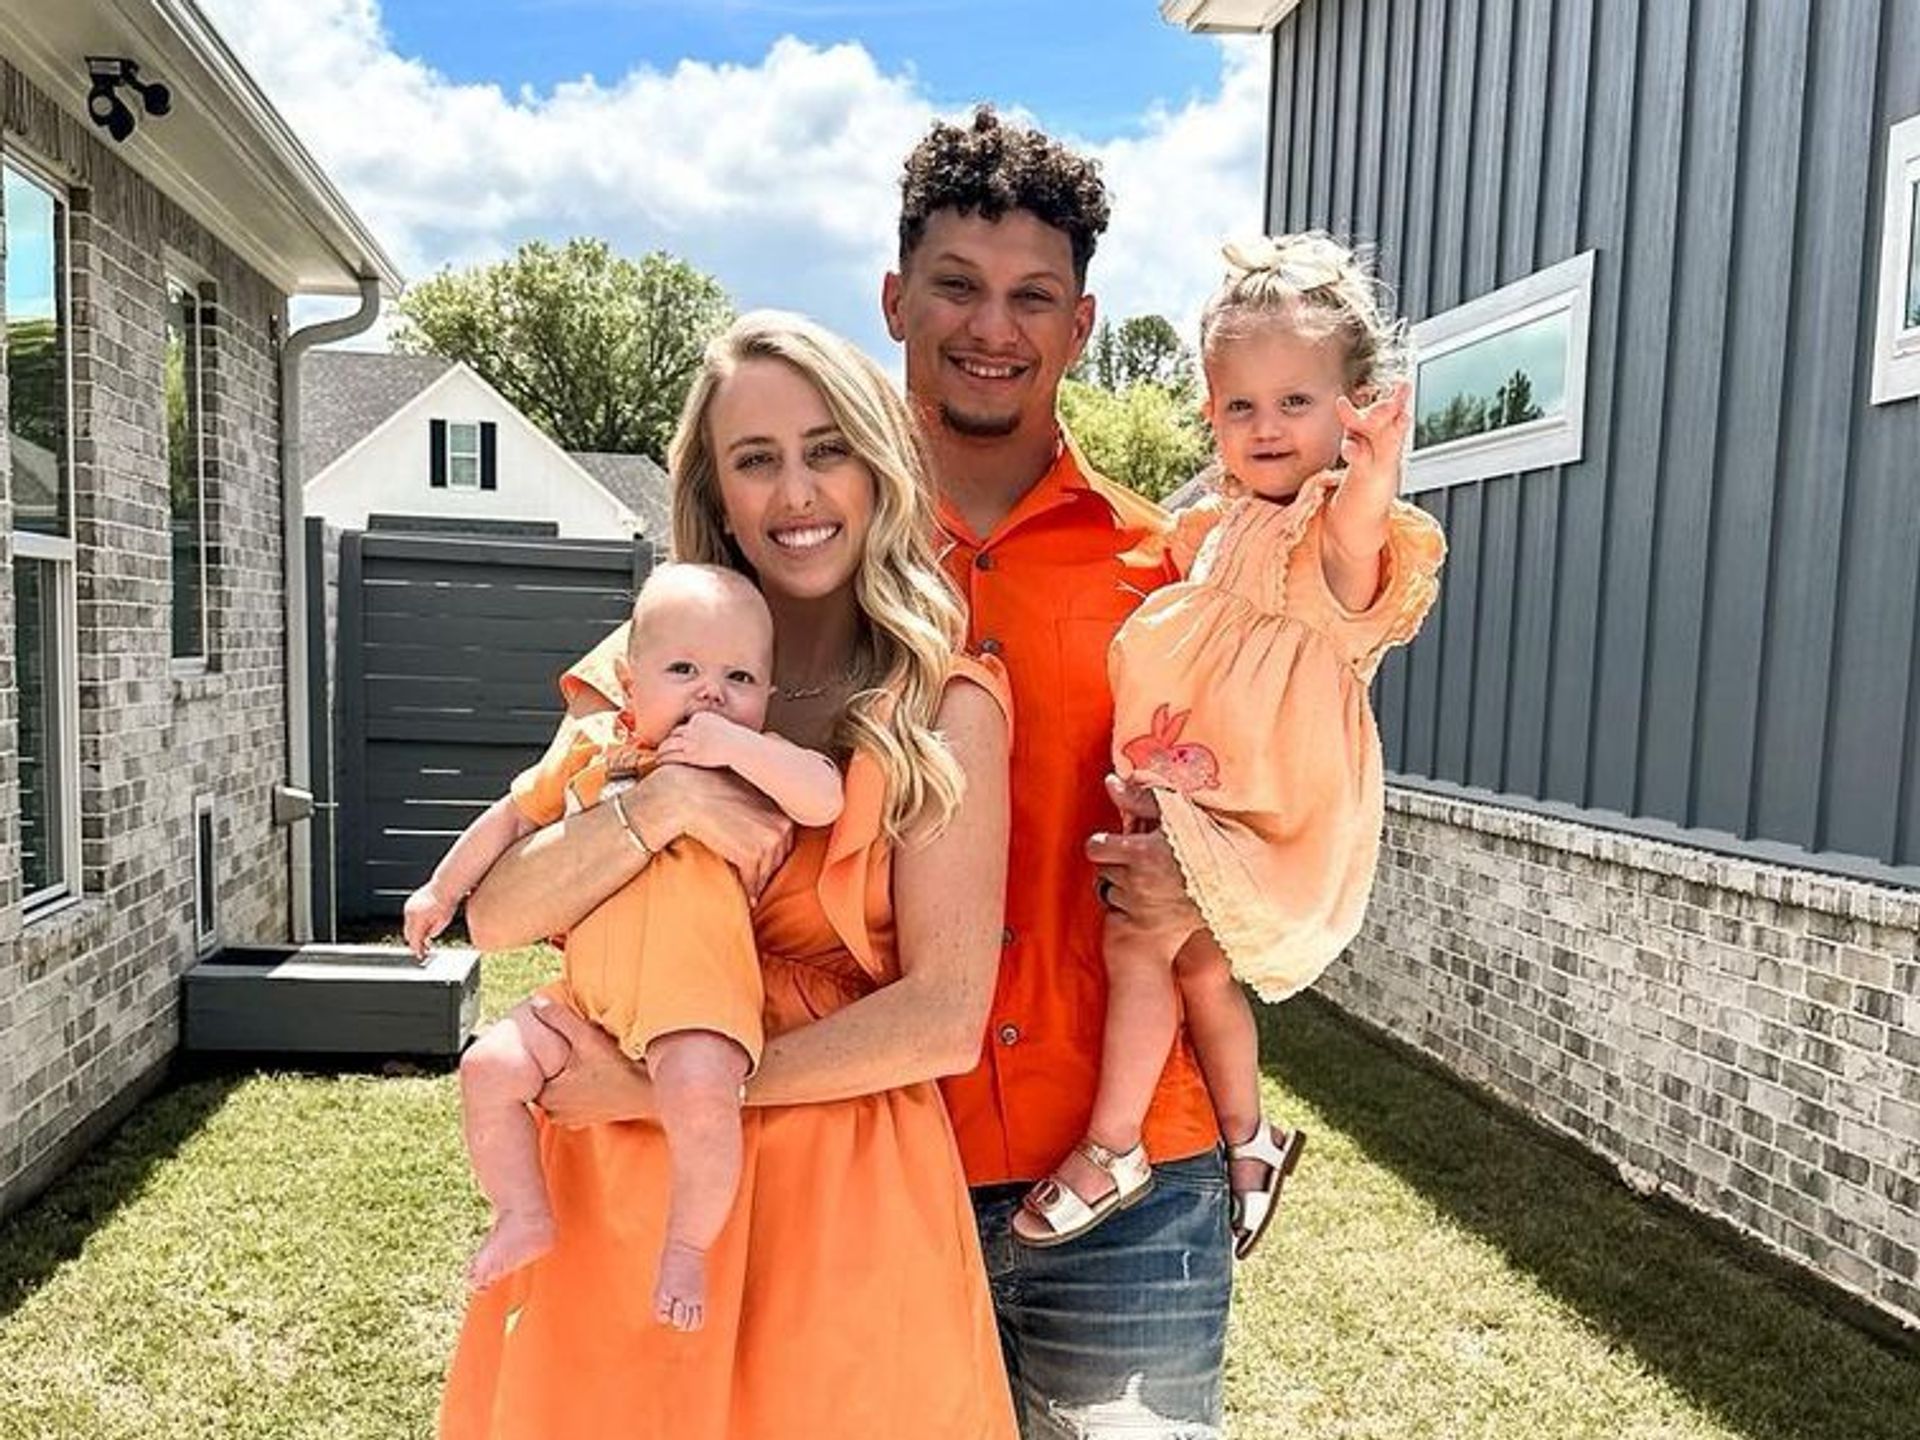 Patrick Mahomes shares pic with baby Sterling at golf course